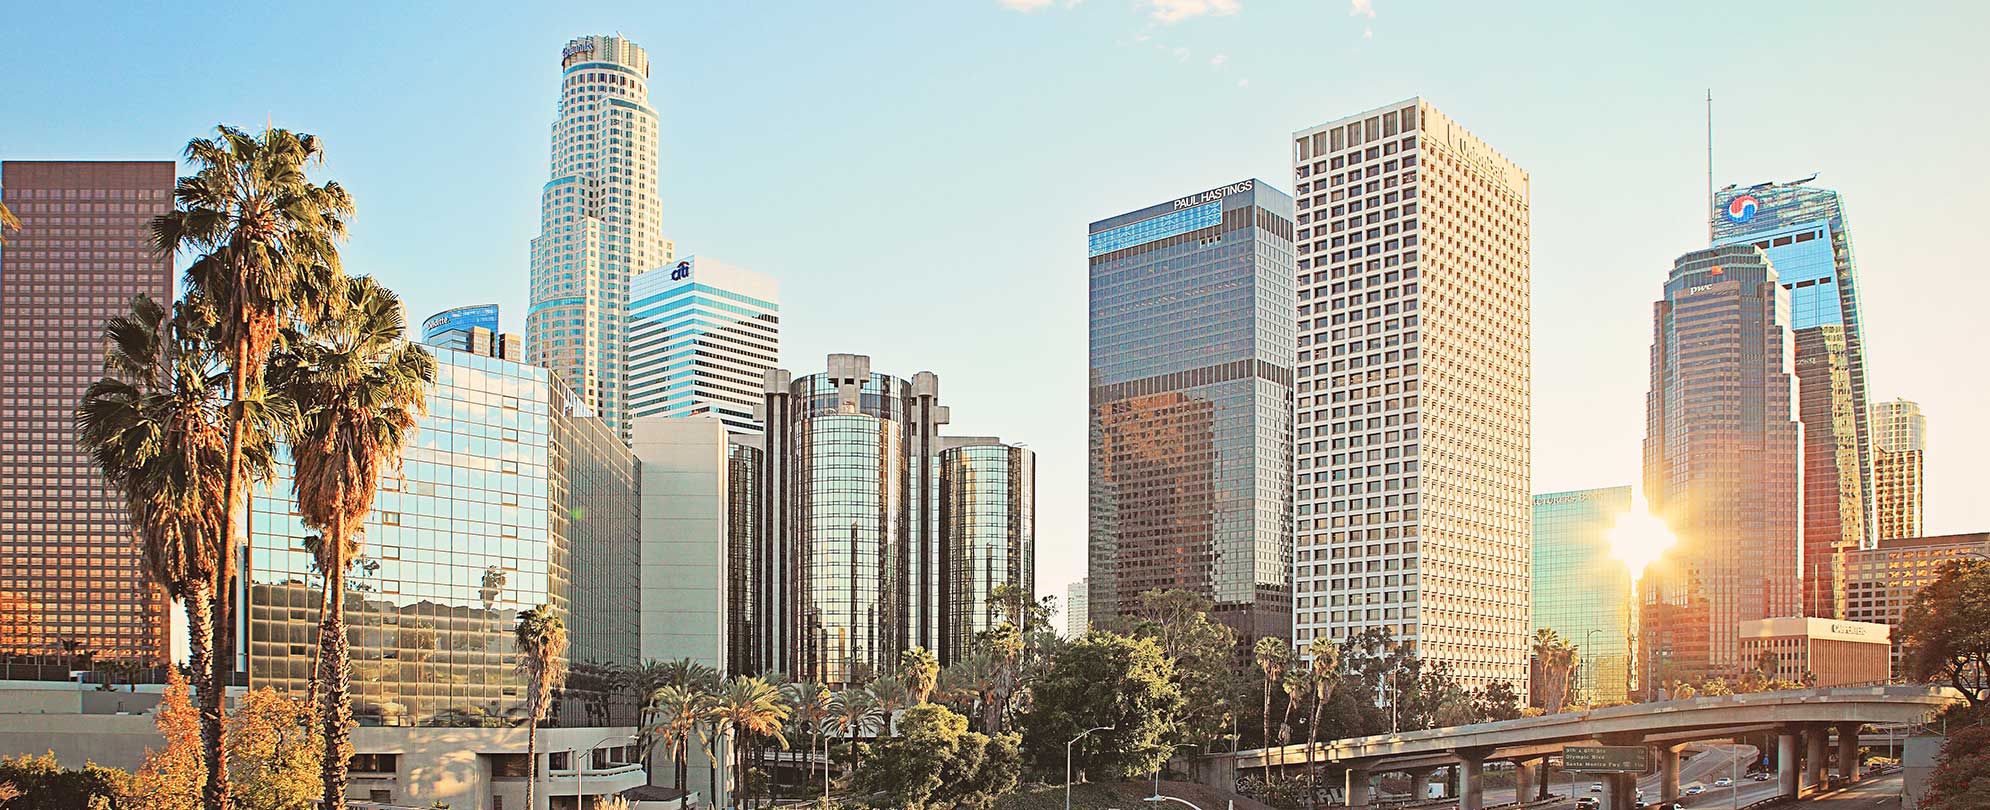 The city skyline of Los Angeles, location of the Tournament of Roses.